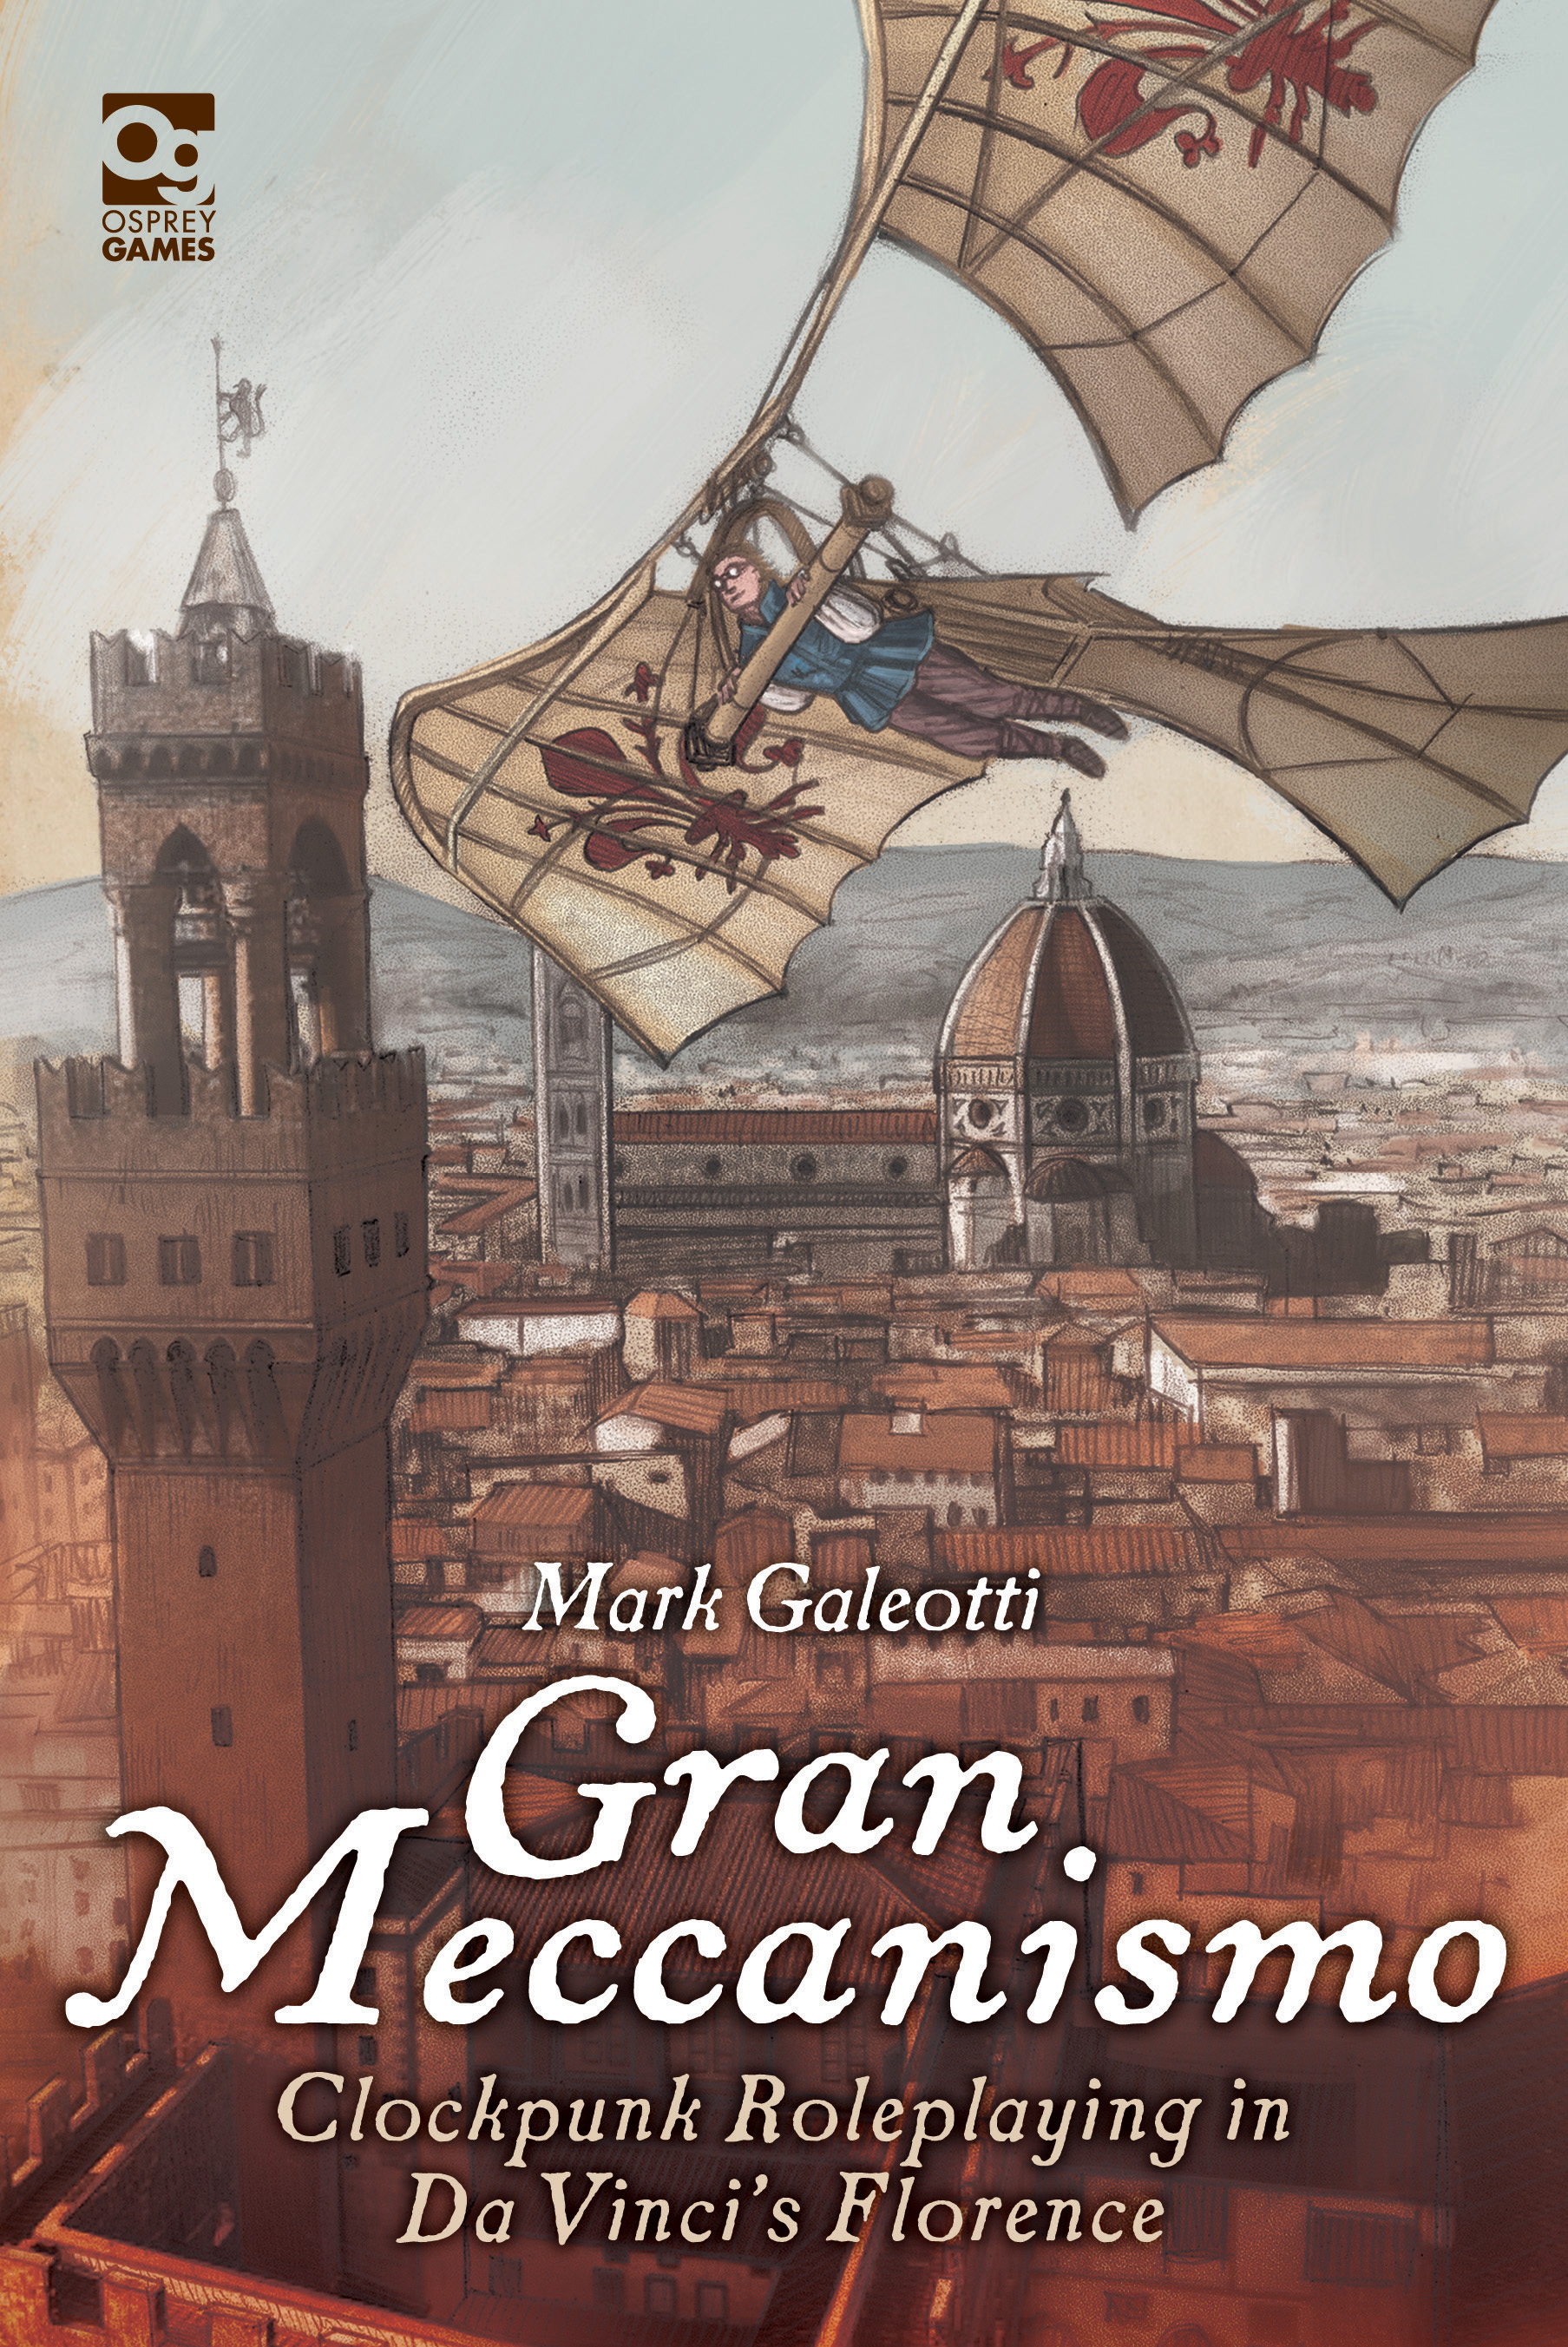 Gran Meccanismo cover depicting someone flying a glider over a Renaissance Italian city